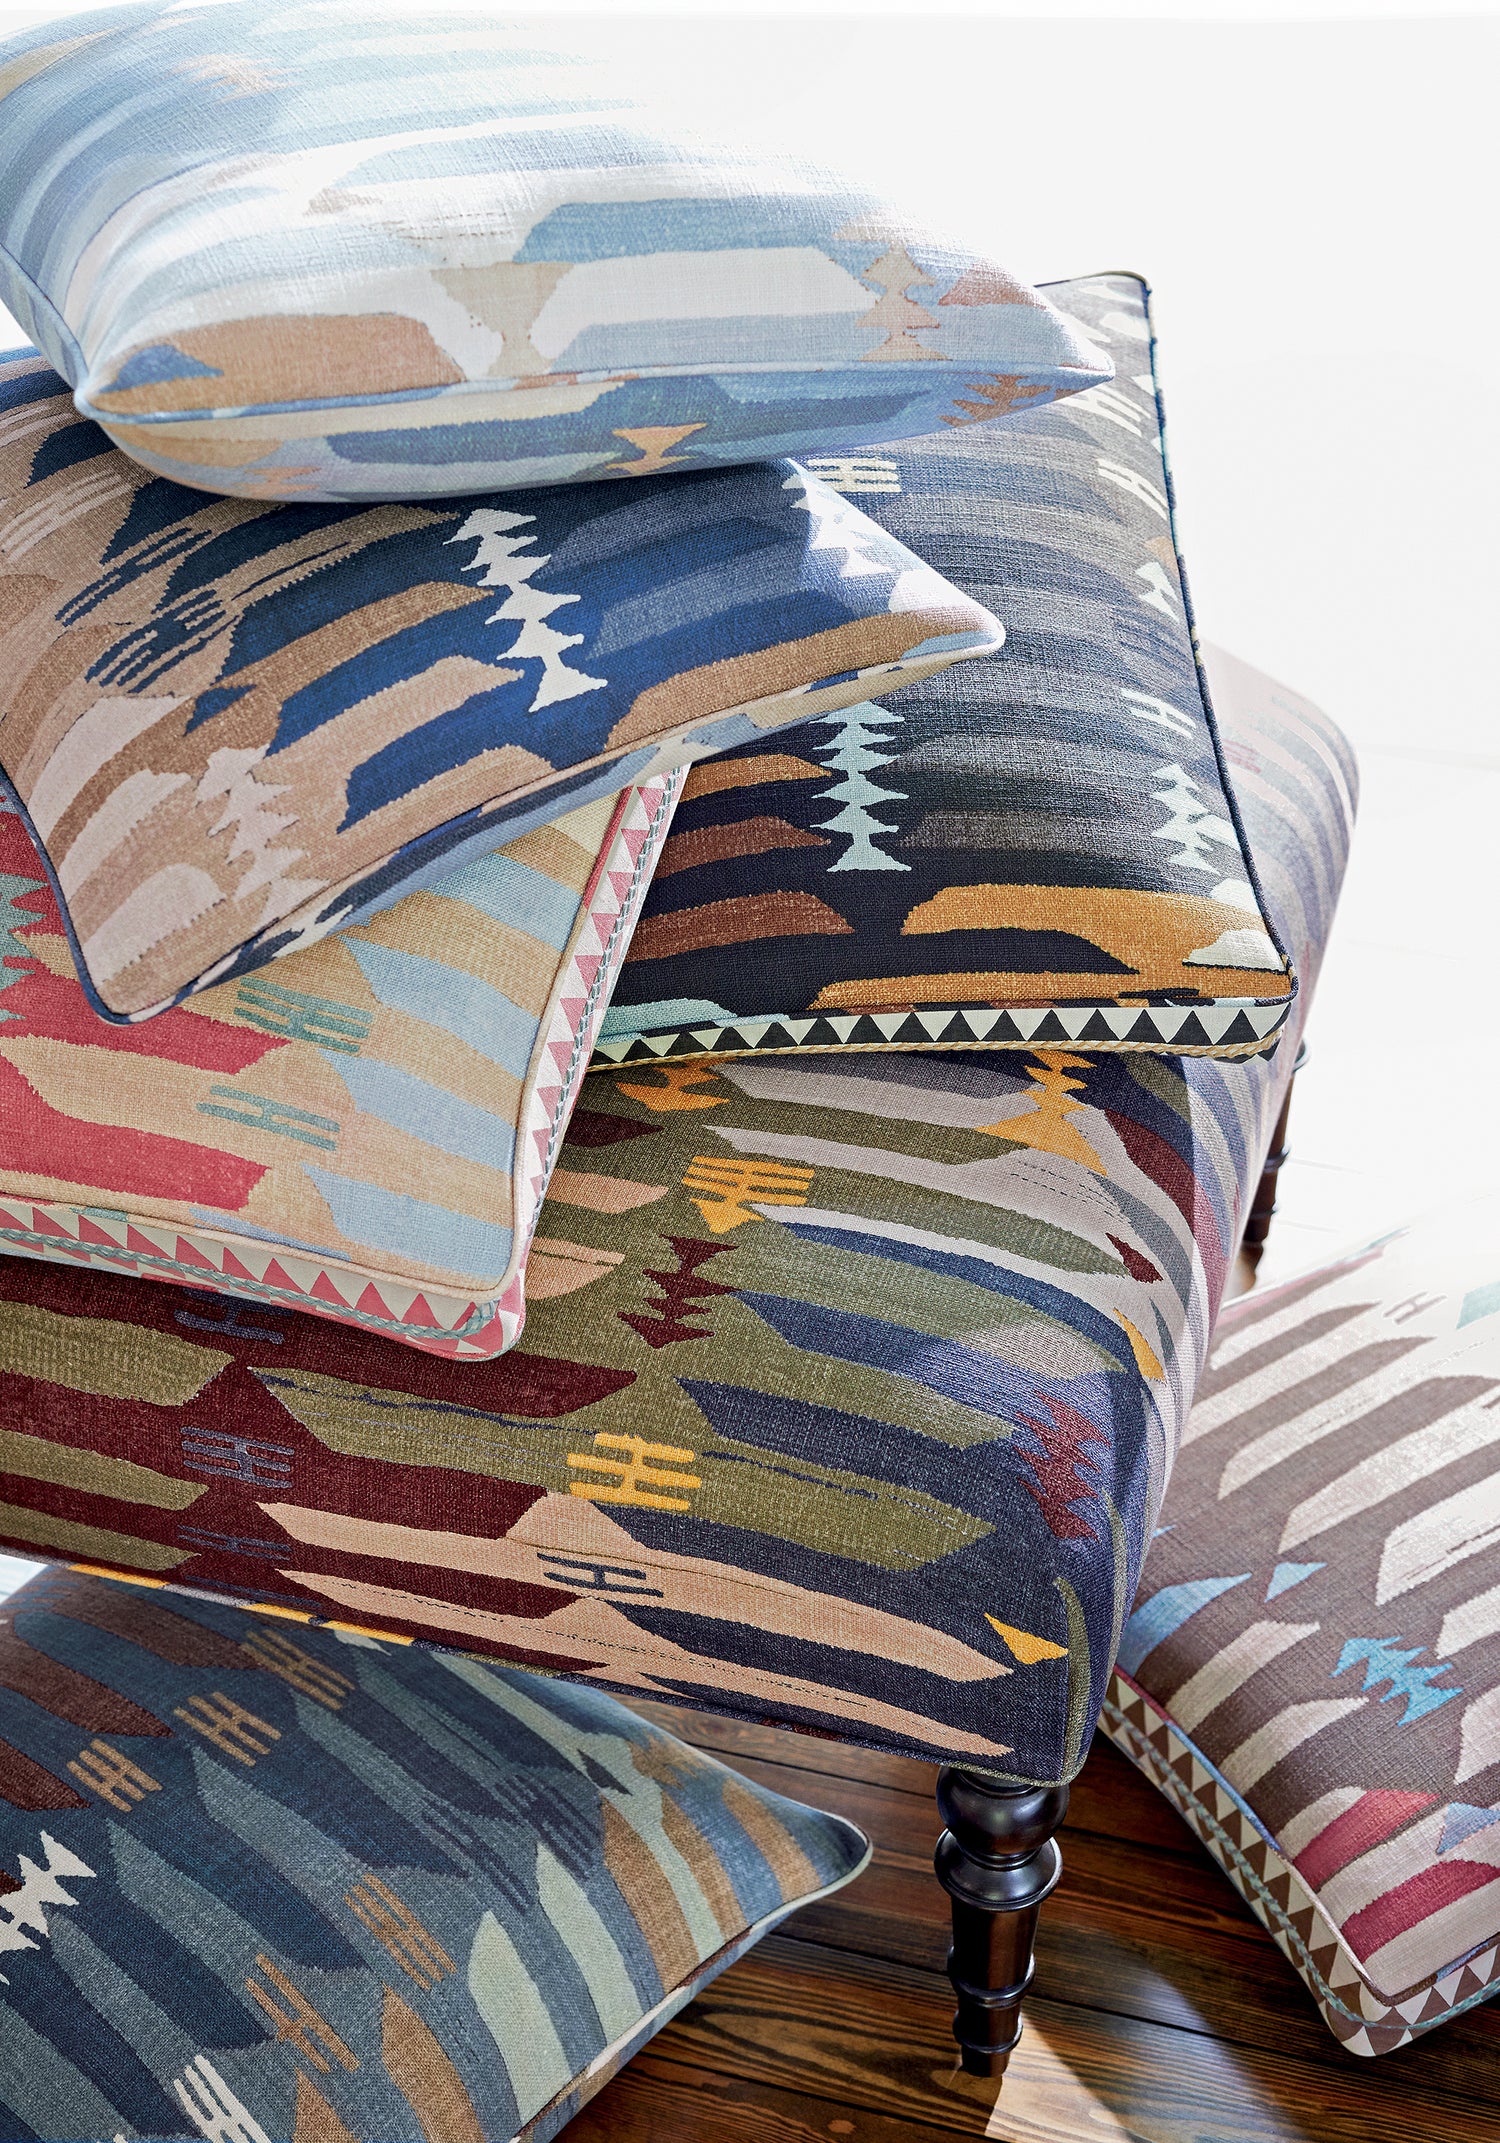 Baxter Ottoman and collection of Rio Grande printed fabric pillows featuring bluestone and moss color fabric - pattern number F913209 - by Thibaut in the Mesa collection